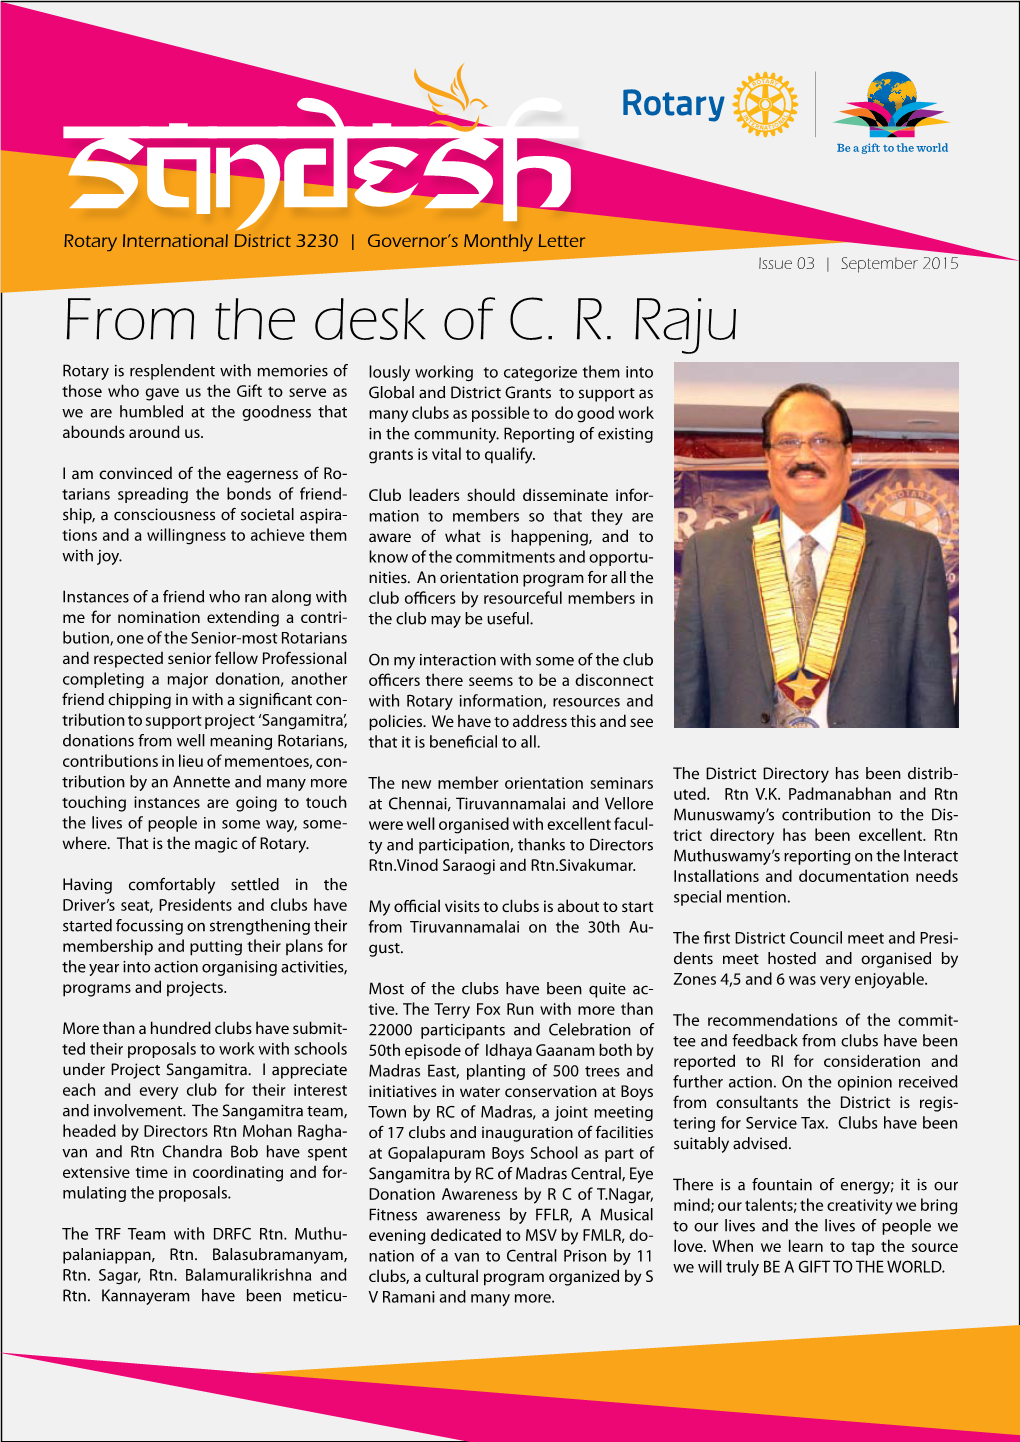 From the Desk of C. R. Raju